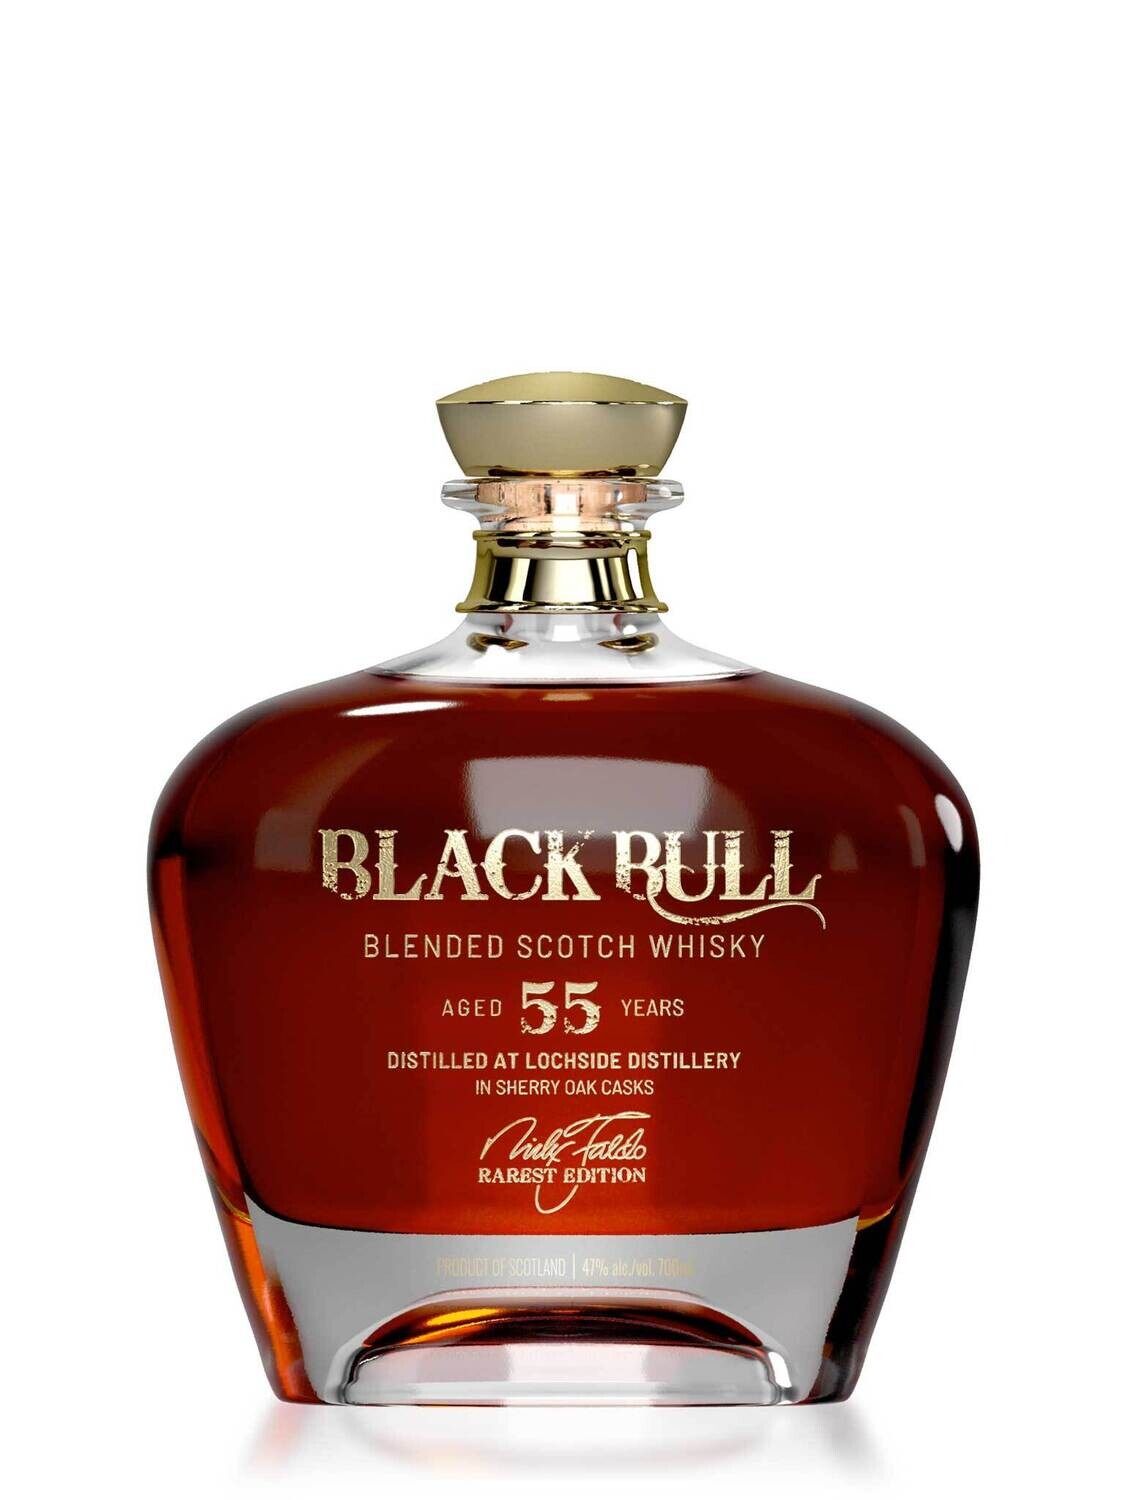 Black Bull 55 Year Old Blended Tale of Two Legends Scotch Whisky 57% ABV 750mL